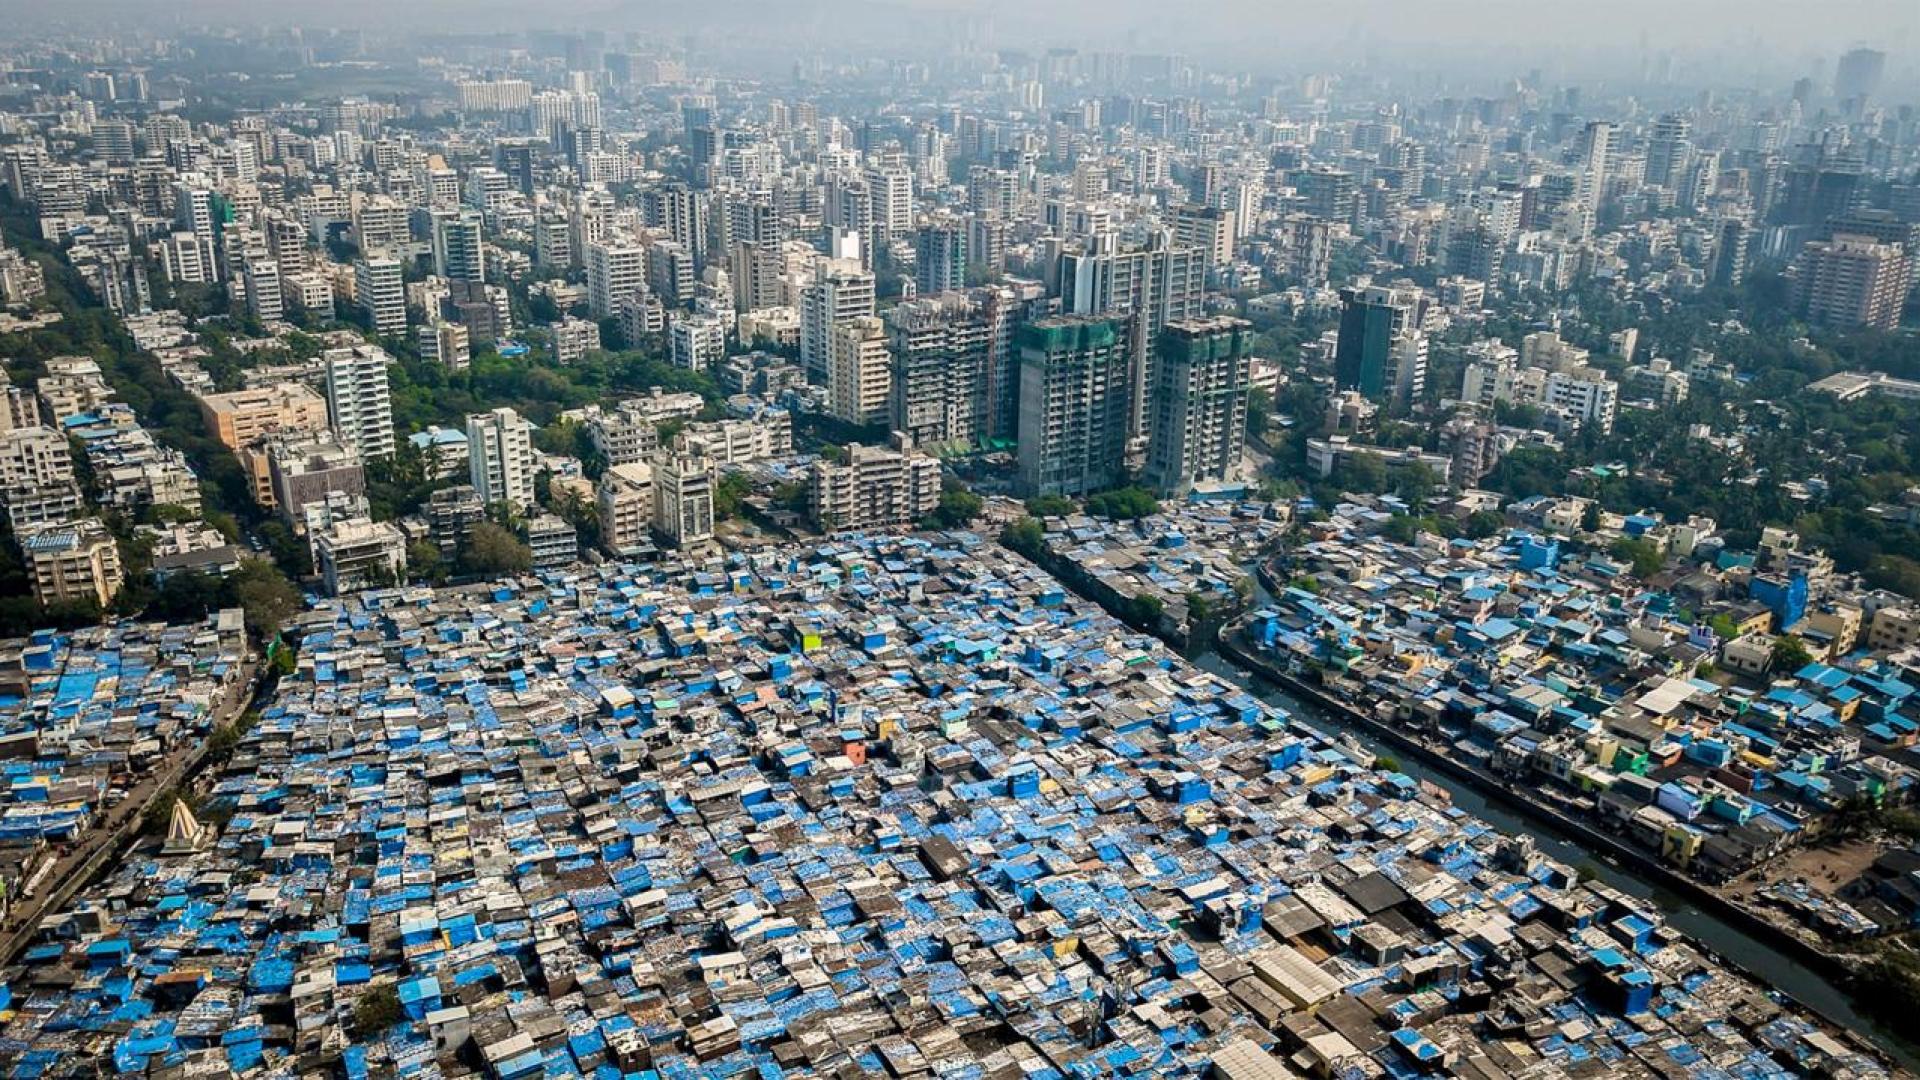 Aerial view of low-income housing against a backdrop of skyscrapers